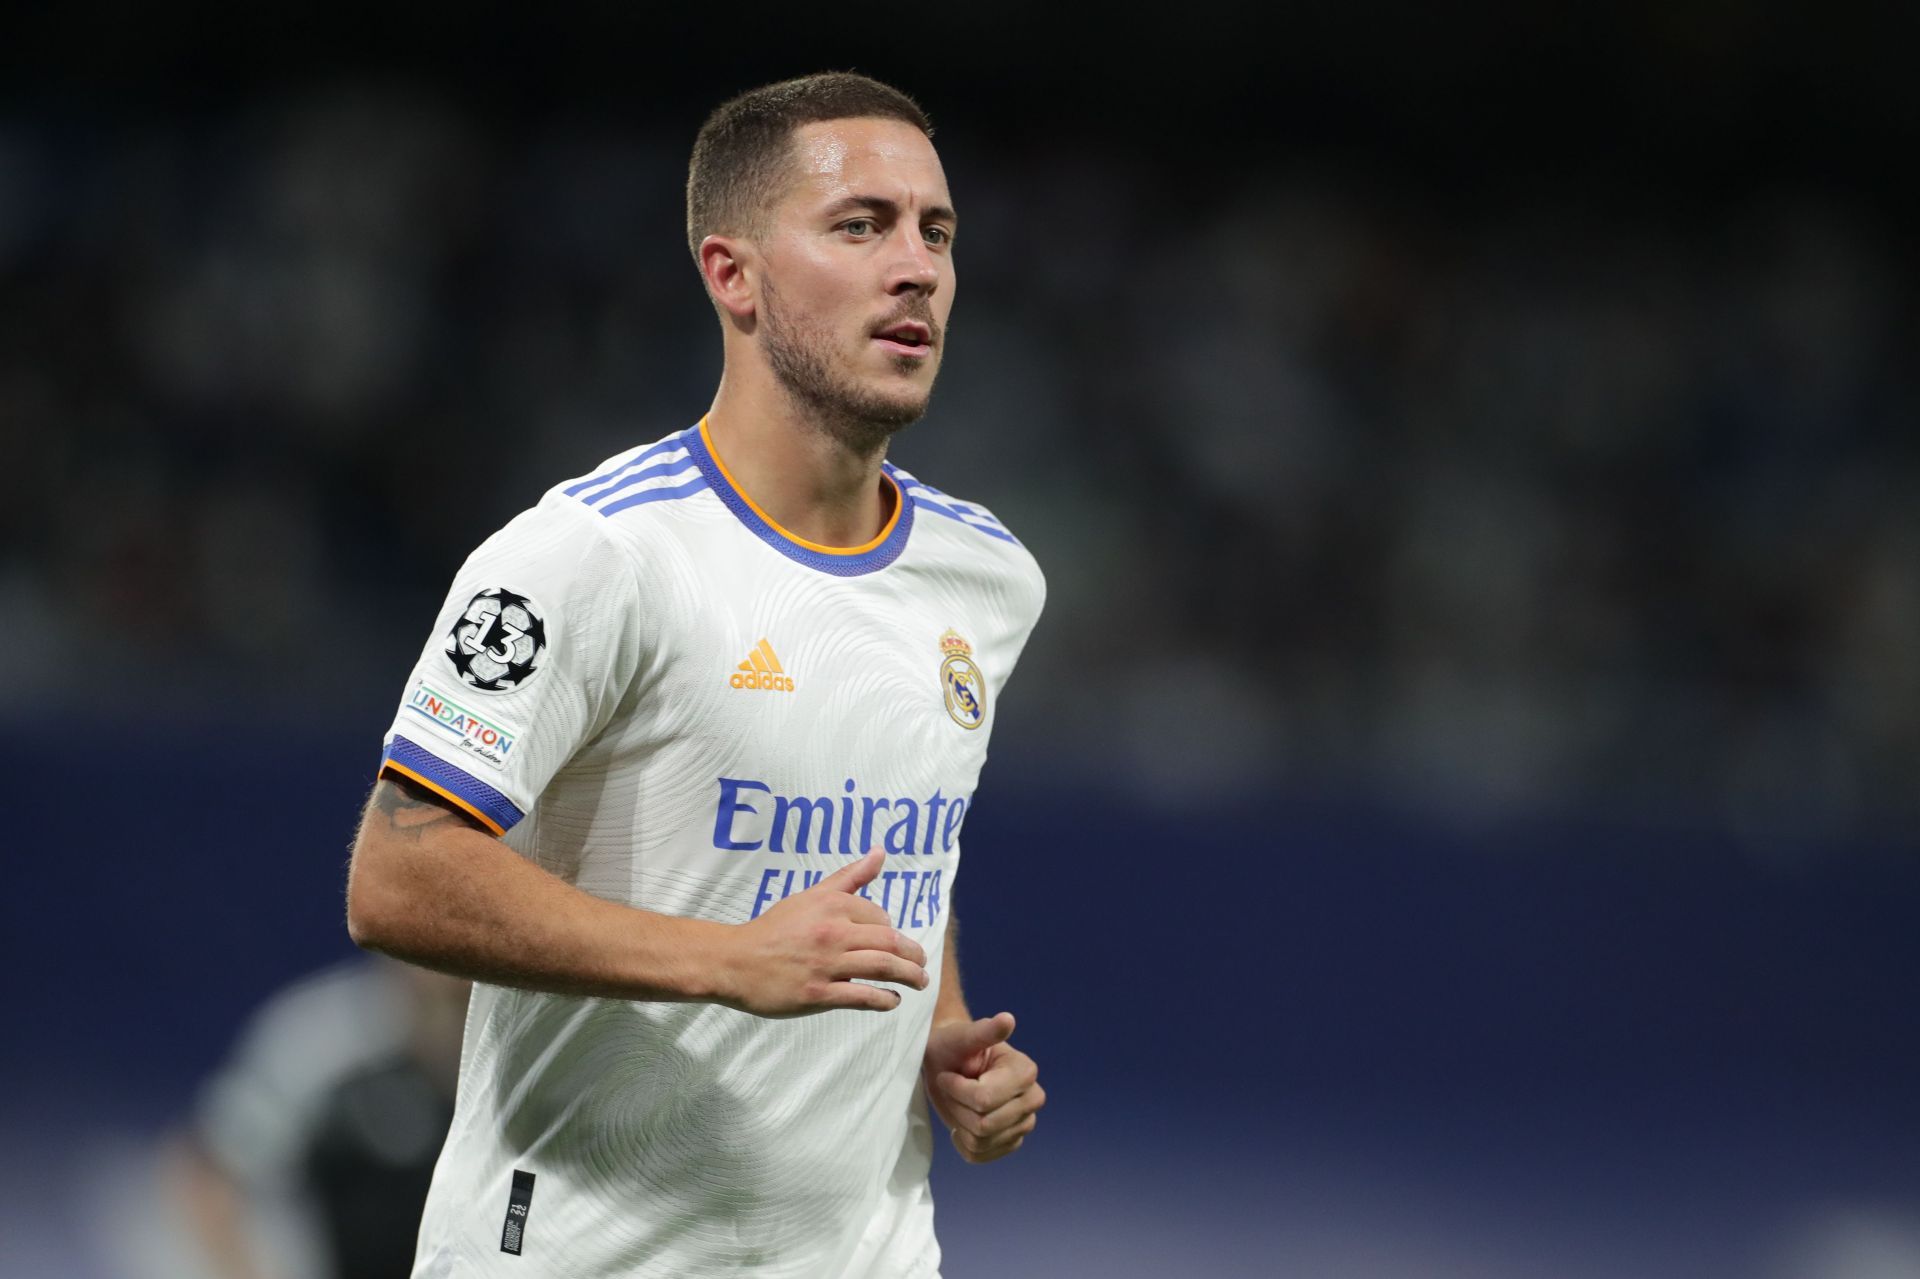 Chelsea are ready to pay Real Madrid &euro;50 million to bring Eden Hazard back.